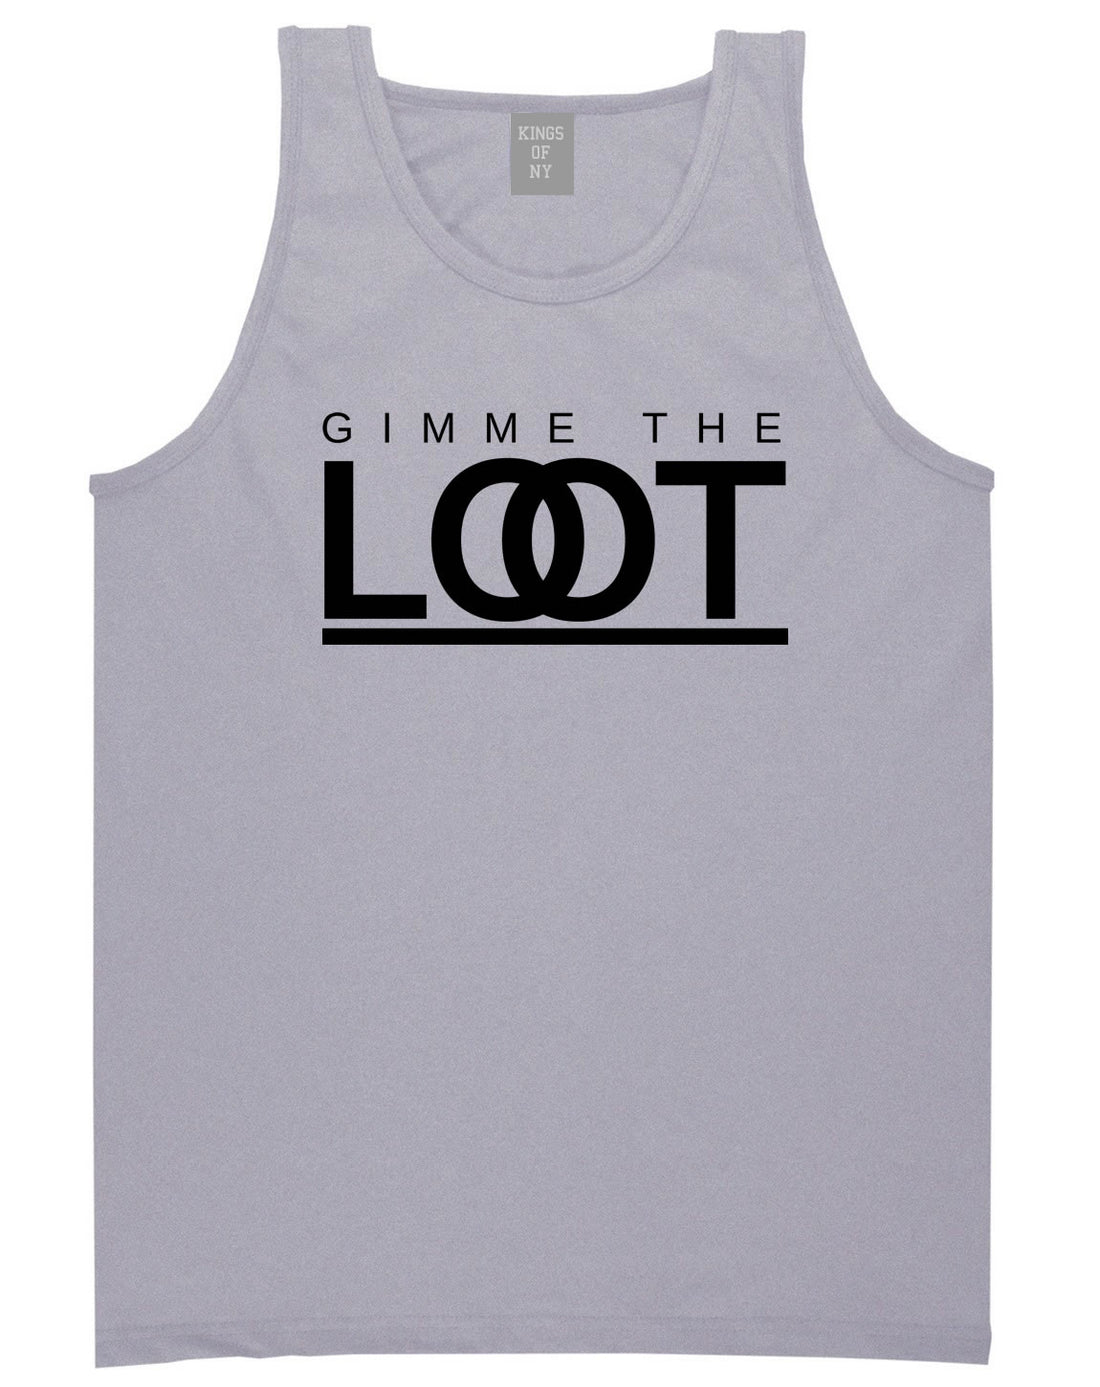 Gimme The Loot  Tank Top in Grey By Kings Of NY